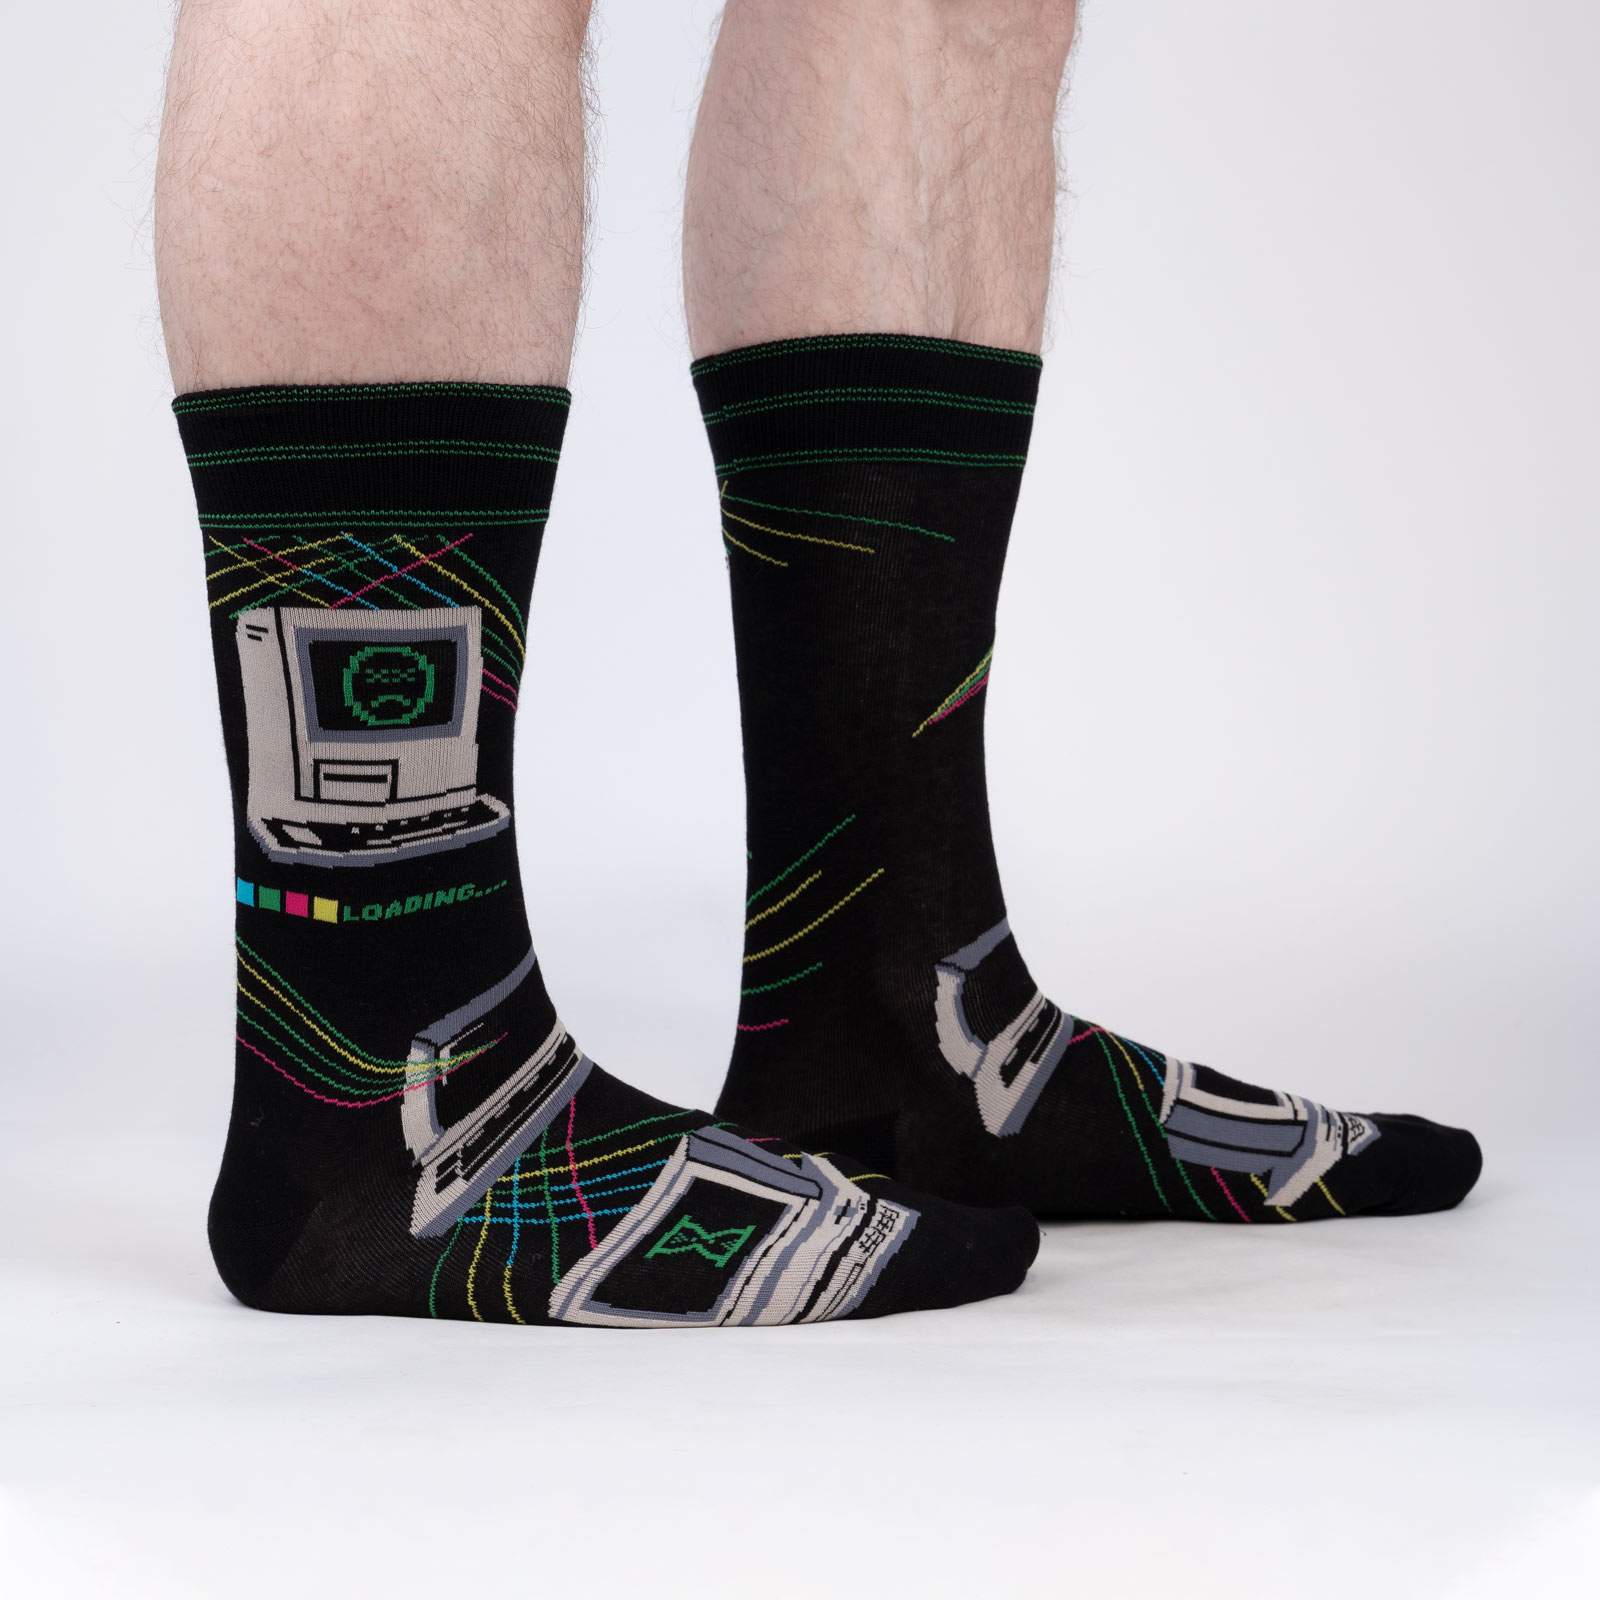 Sock It To Me Control Alt Delete men's crew sock featuring black sock with image of 1990s Mac computer with sad face. Socks worn by model seen from side. 